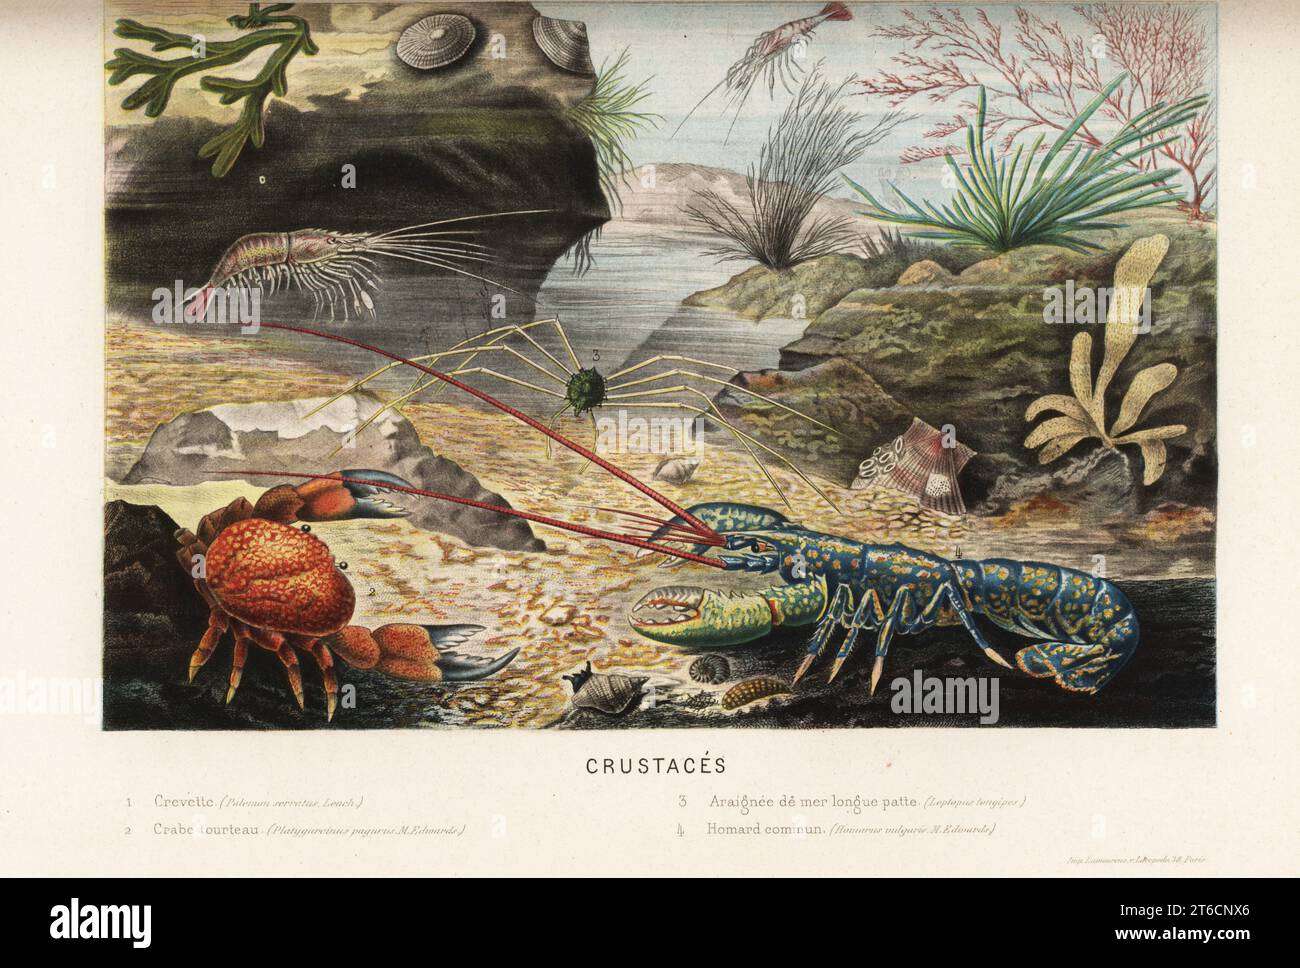 Prawn, Palaemon serratus 1, edible crab, Cancer pagurus 2, spider crab, Phalangipus longipes3 , and European lobster, Homarus gammarus 4. Crevette, crabe tourteau, araignee de mer longue patte, homard commun. Chromolithograph from Alfred Fredols Le Monde de la Mer, the World of the Sea, edited by Olivier Fredol, Librairie Hachette et. Cie., Paris, 1881. Alfred Fredol was the pseudonym of French zoologist and botanist Alfred Moquin-Tandon, 1804-1863. Stock Photo